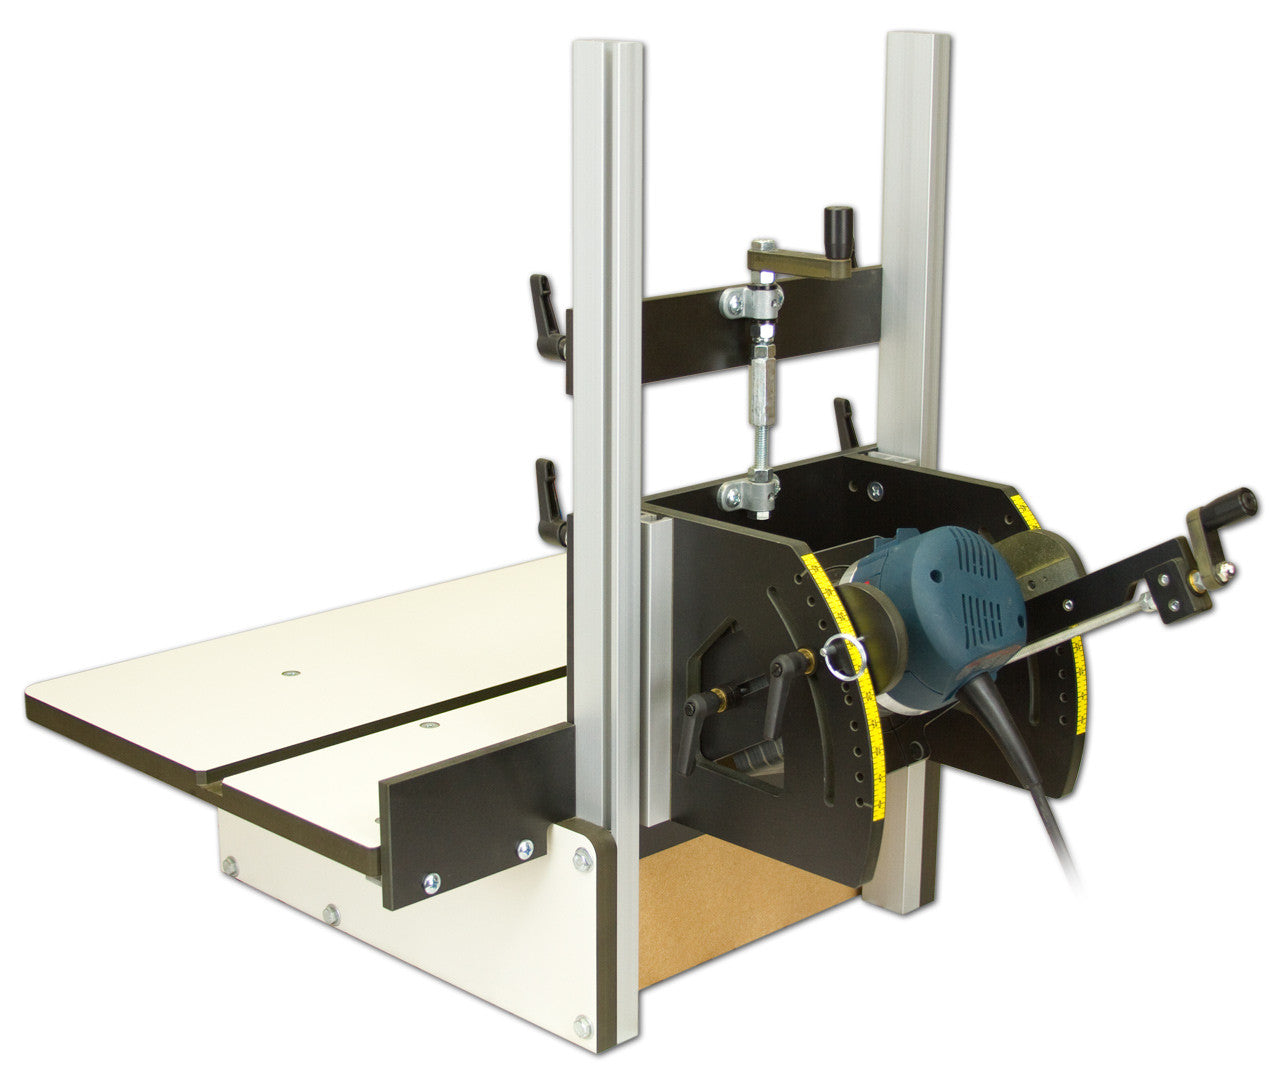 6002 Horizontal Router Table & Angle Ease for 3.5" Diameter Motor